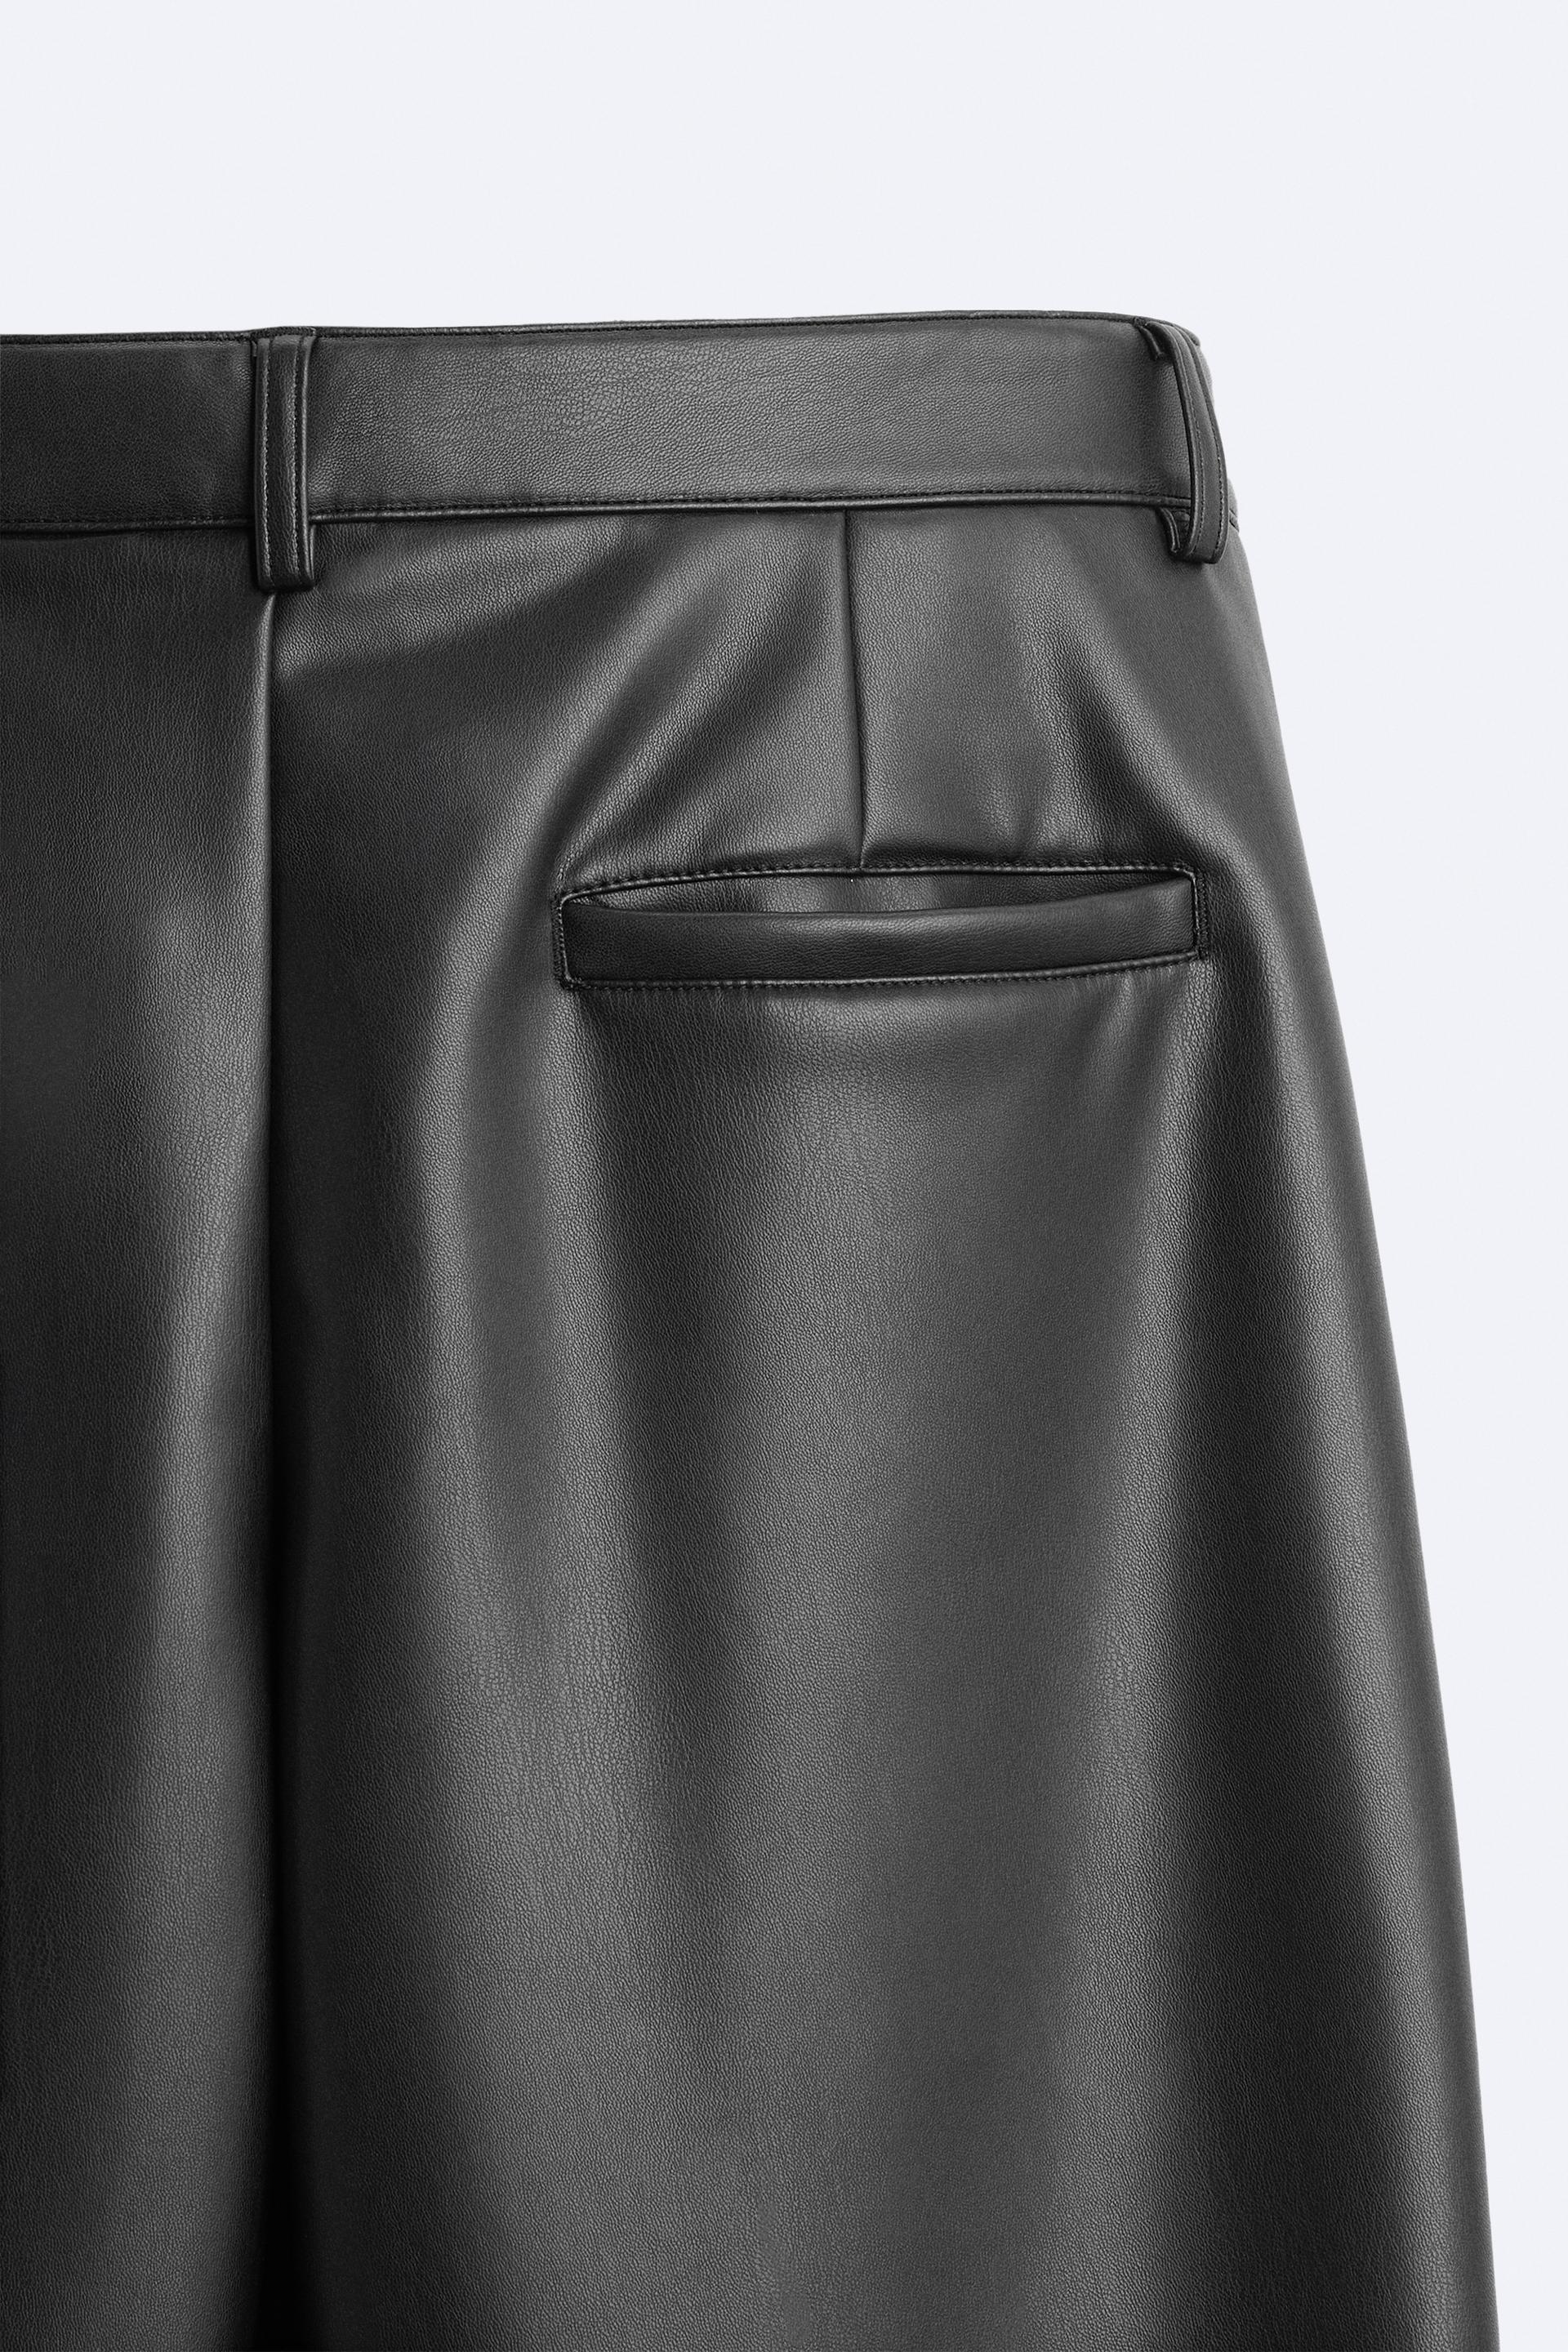 Zara High Rise Faux Leather Mom Fit Pants Black Small